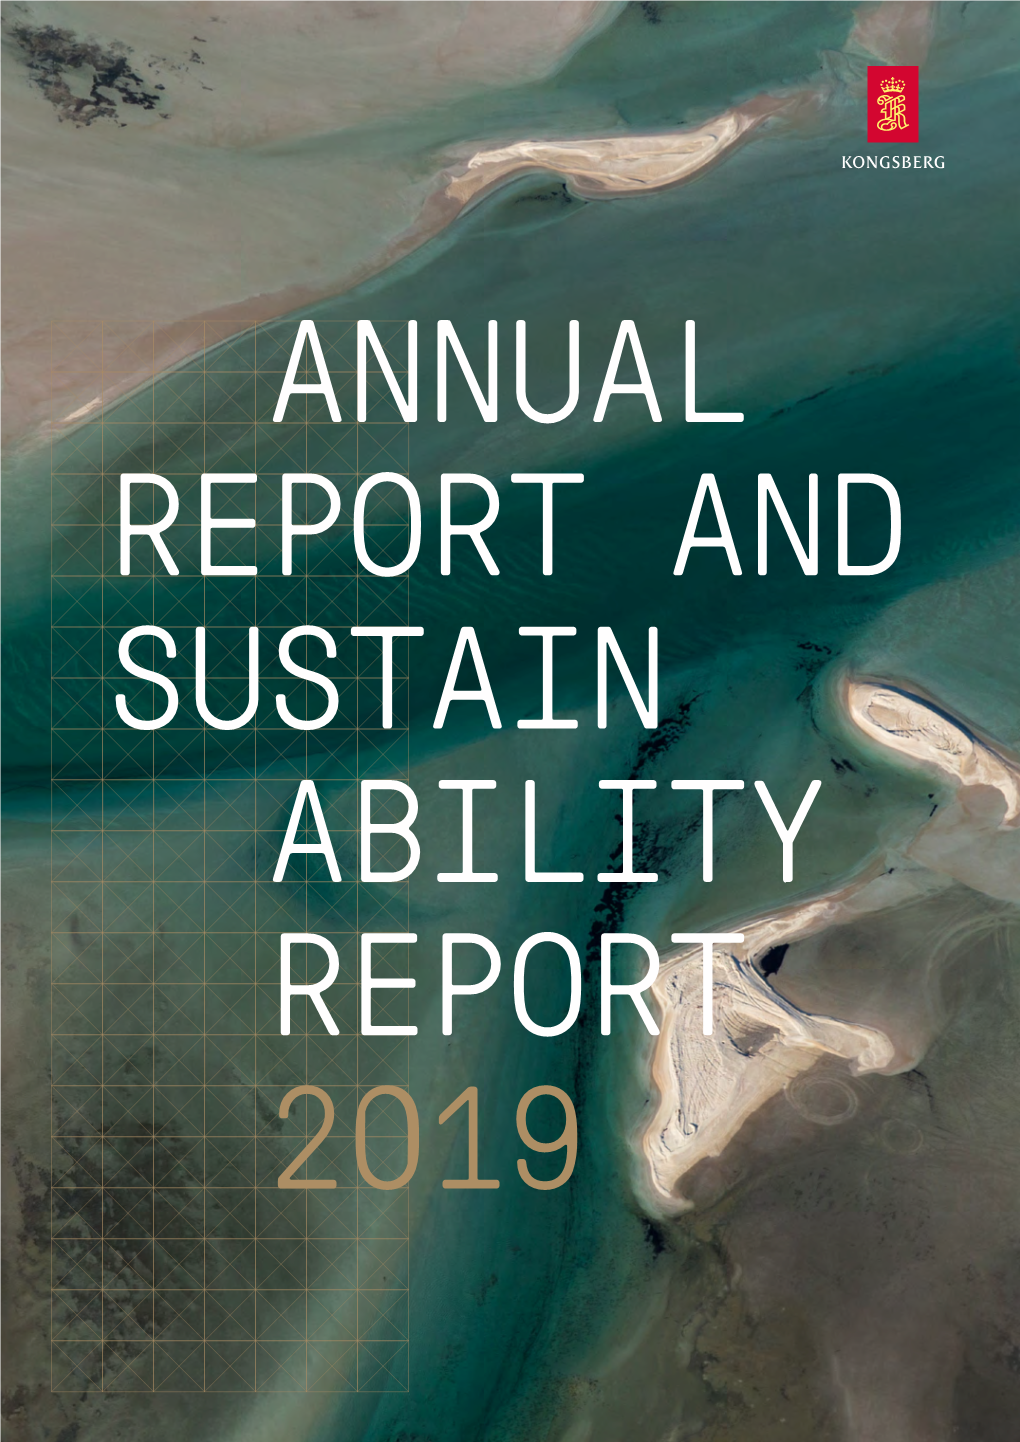 ANNUAL REPORT and SUSTAIN ABILITY REPORT 2019 01 Year 2019 02 About 03 Sustainability 04 Corporate 05 Directors’ Report and KONGSBERG Governance Financial Statements